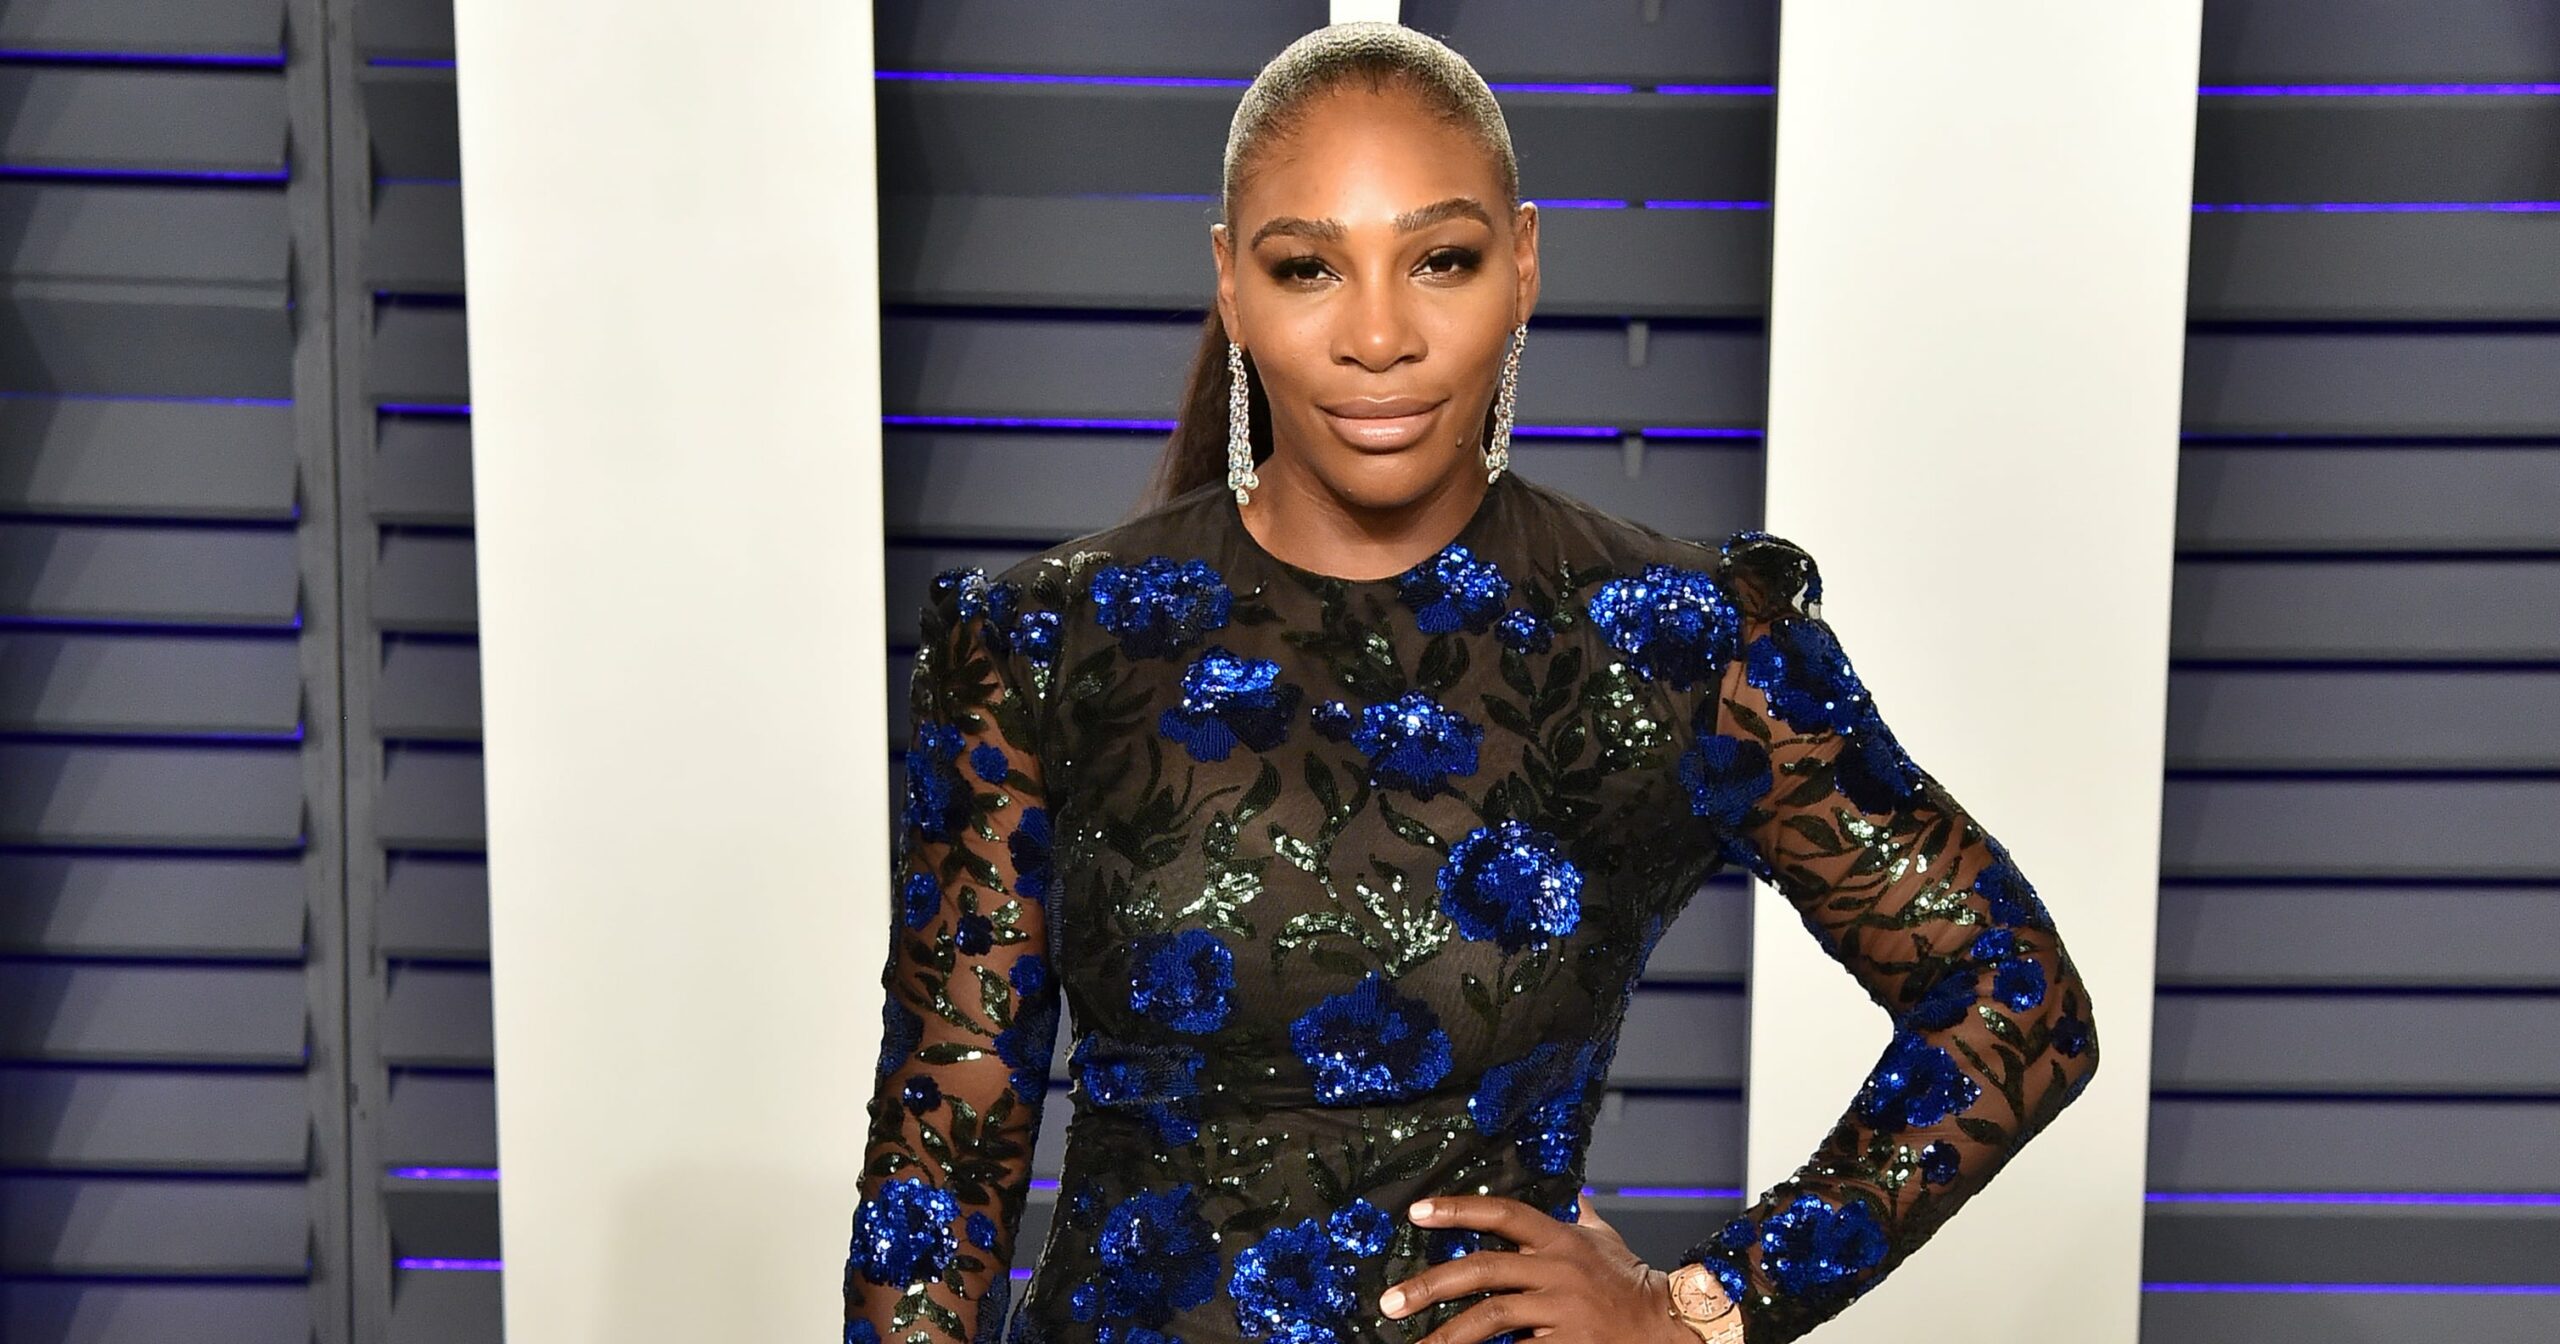 17-of-serena-williams’s-most-iconic-fashion-moments-through-the-years